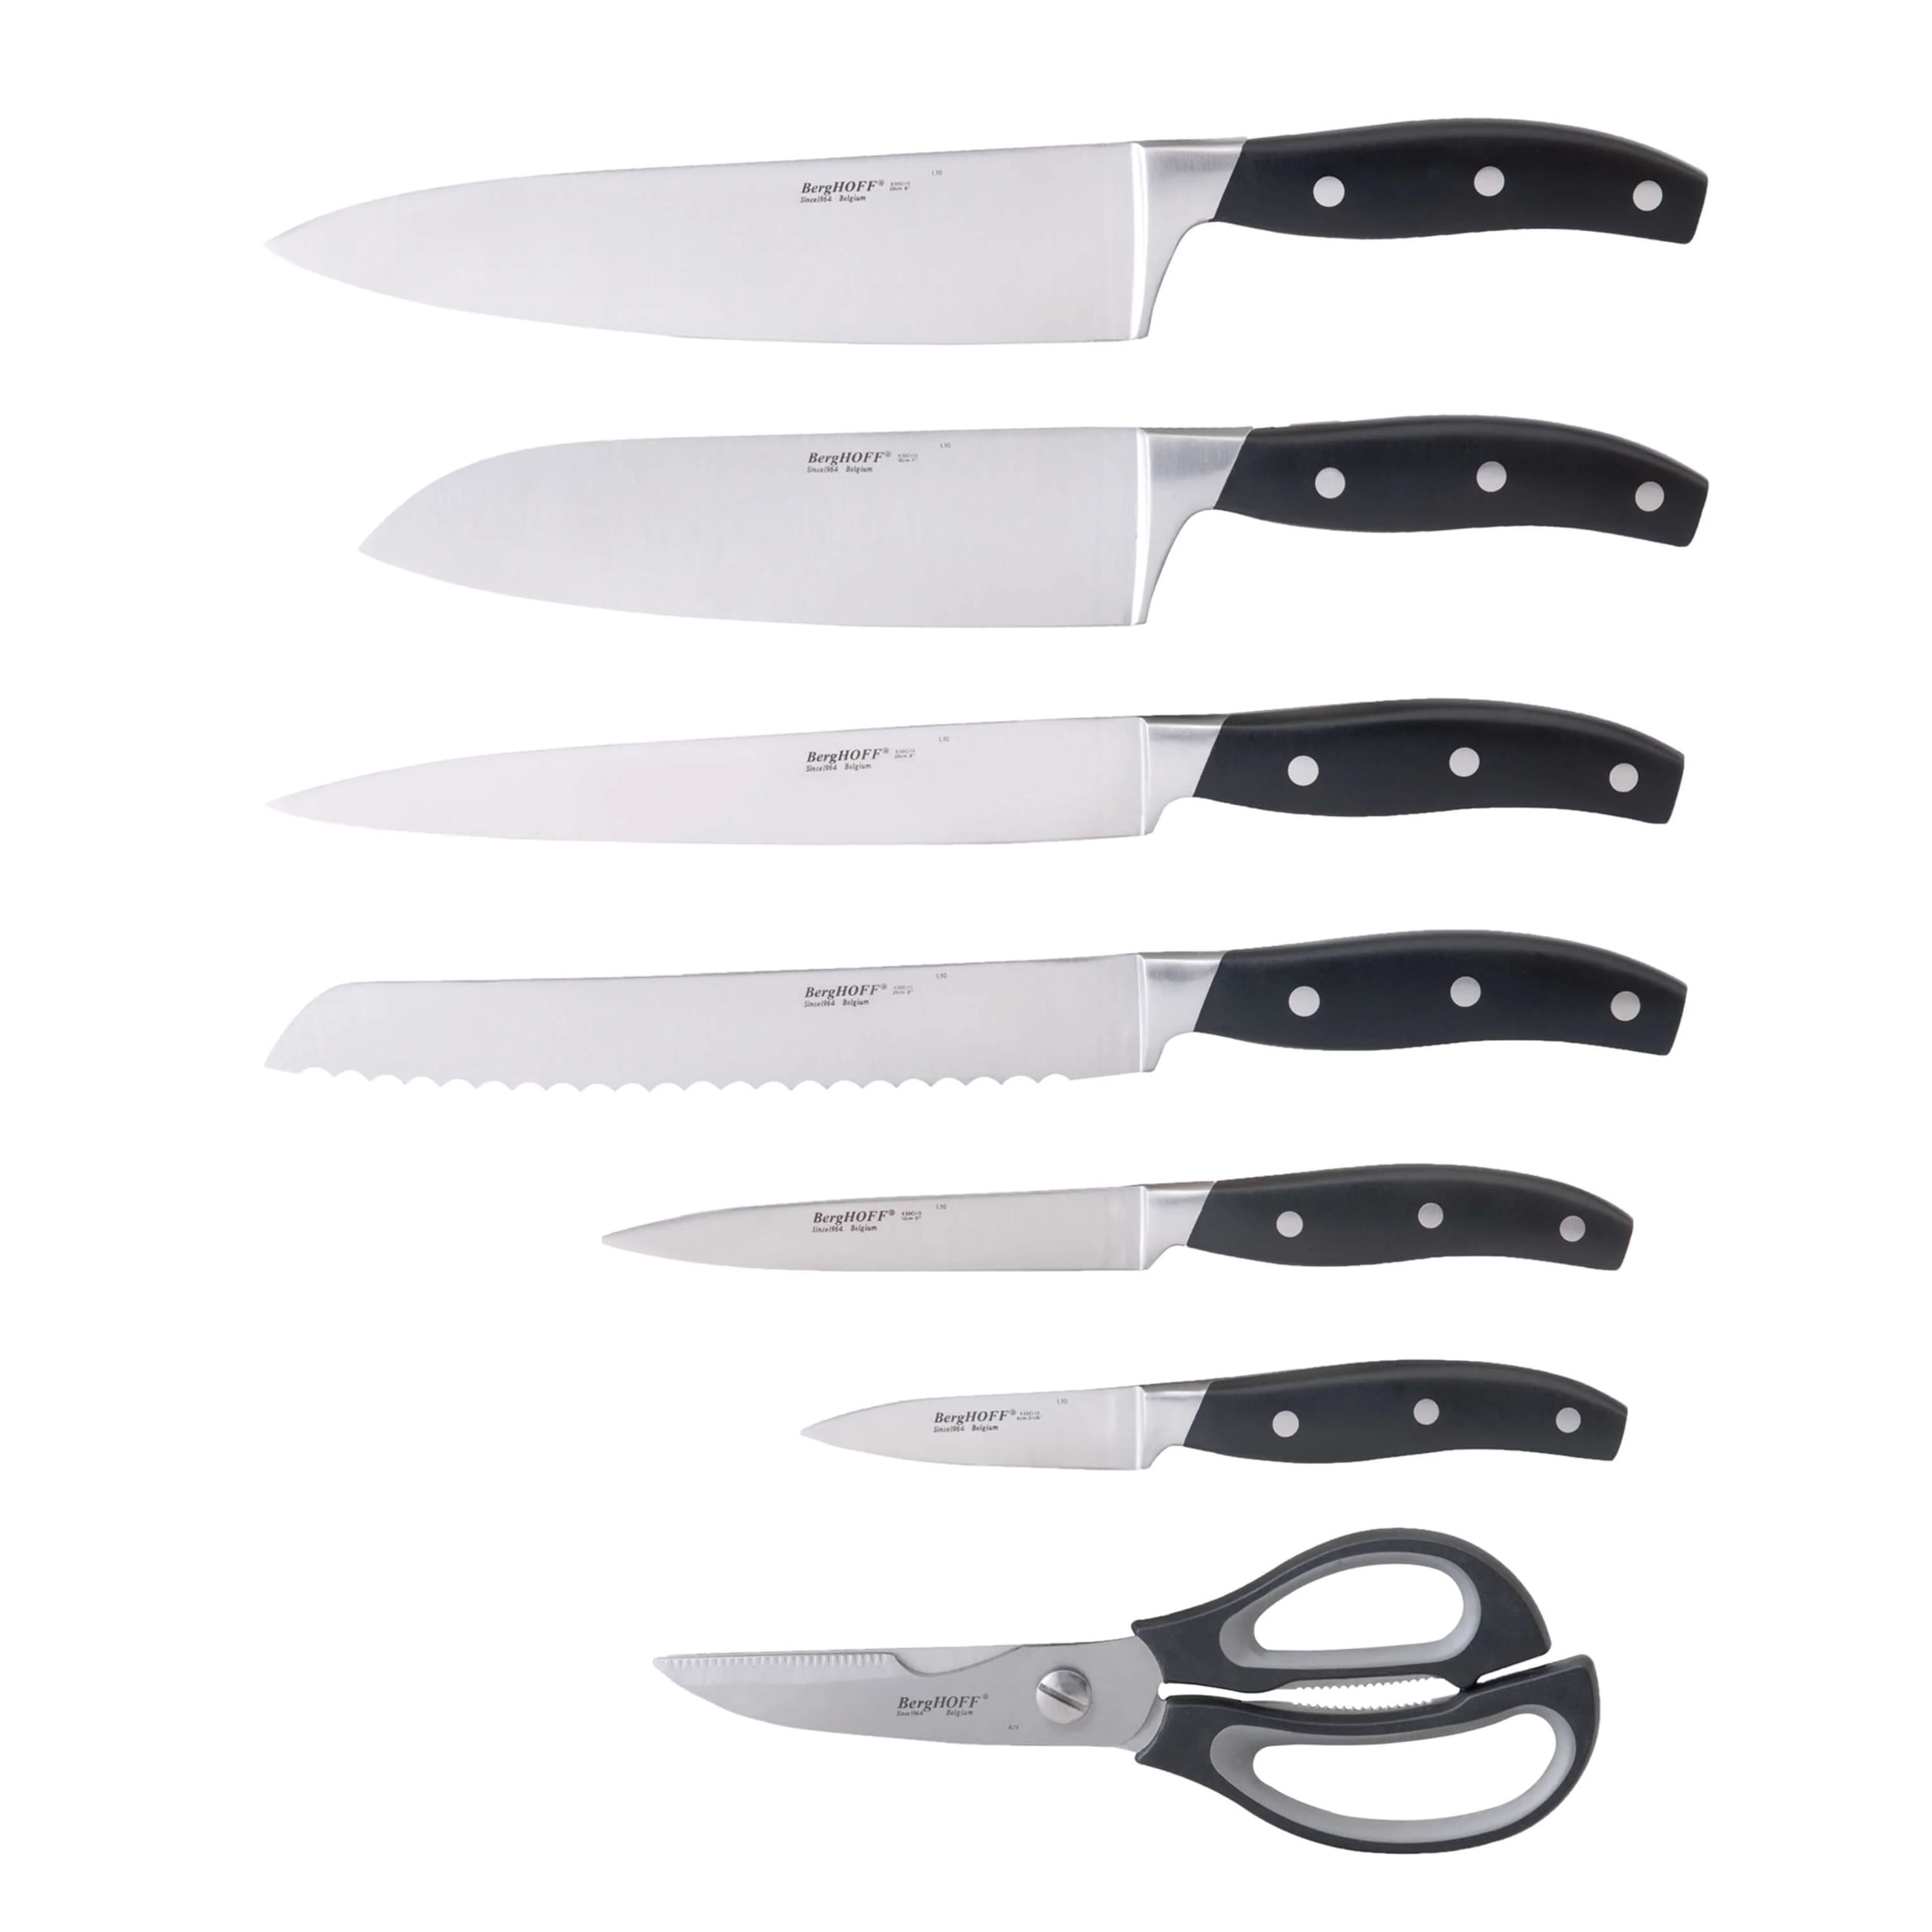  BergHOFF 6-Piece Hollow Handle Knife Set with Knife